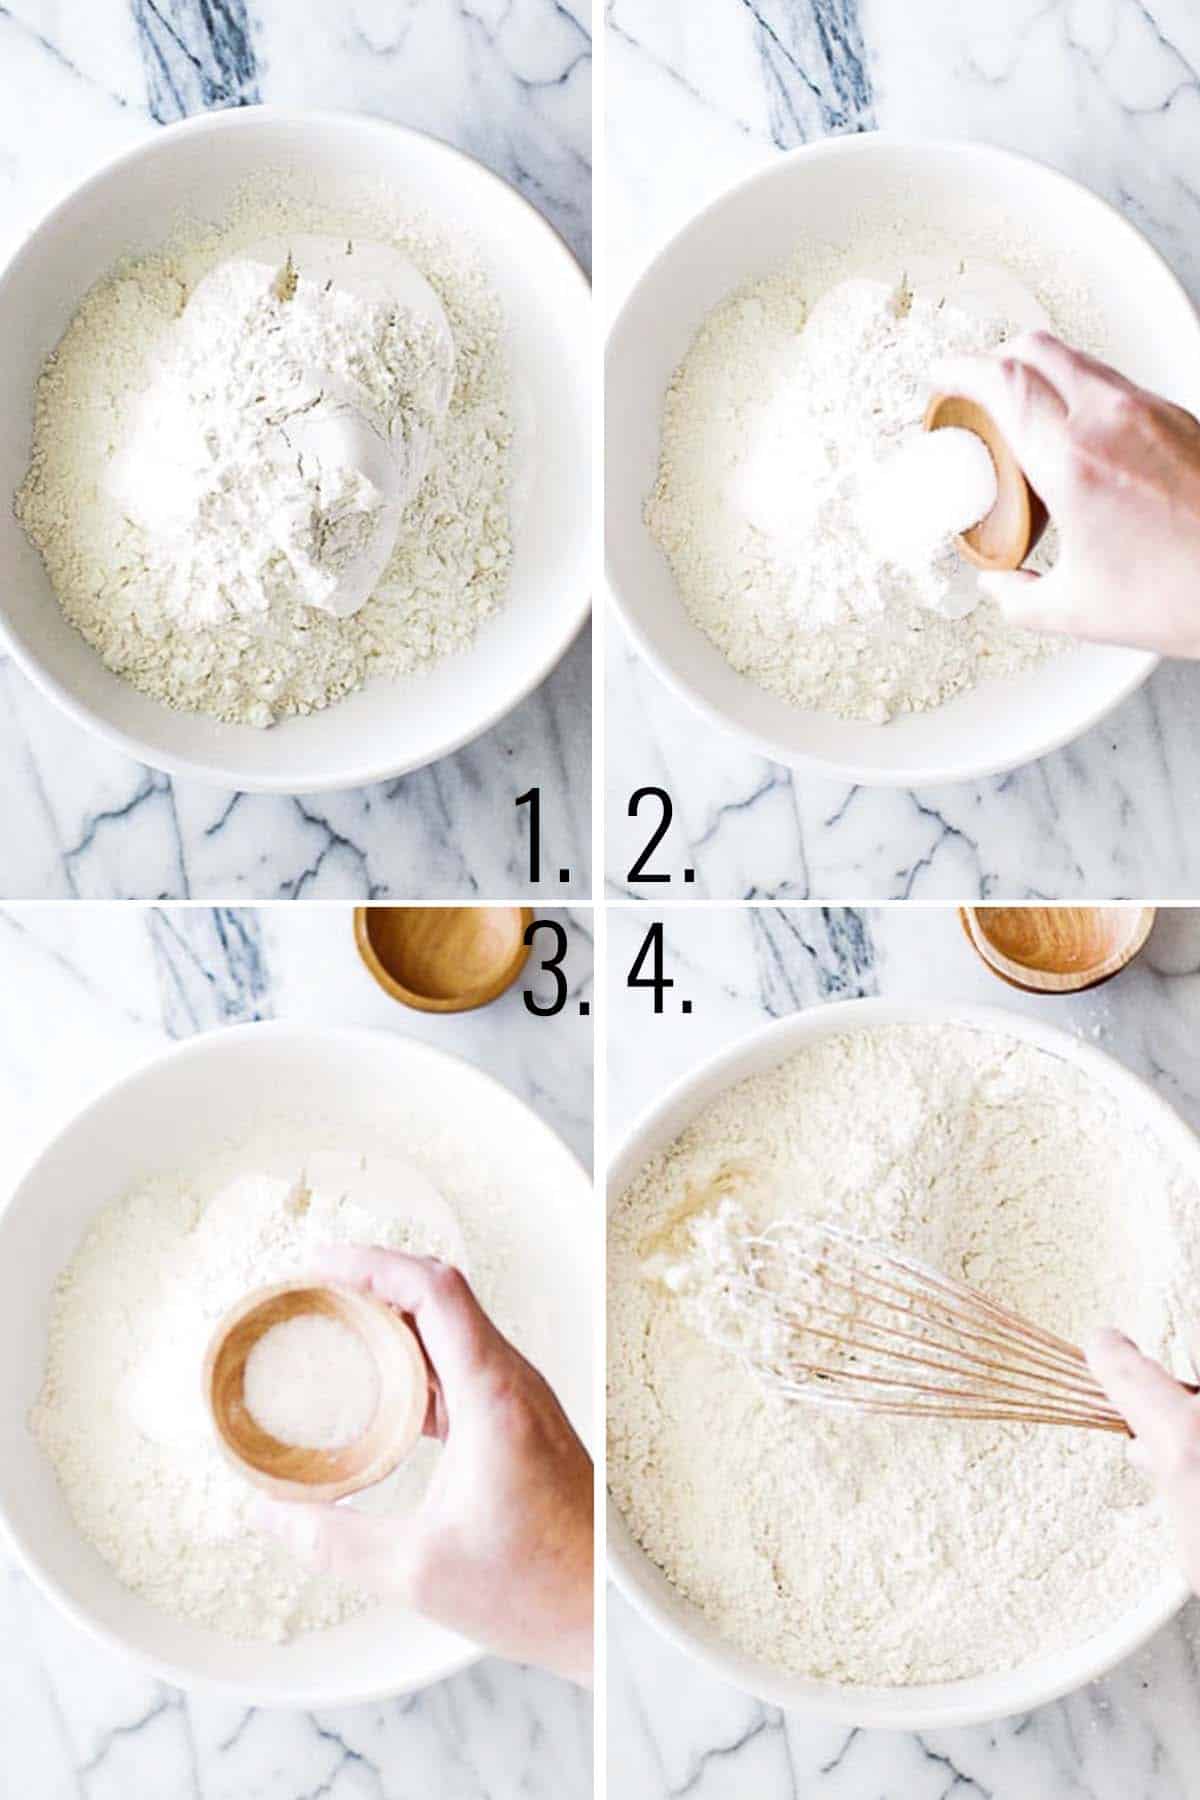 A collage of images showing the steps for mixing the dry ingredients to make a sweet pie recipe.